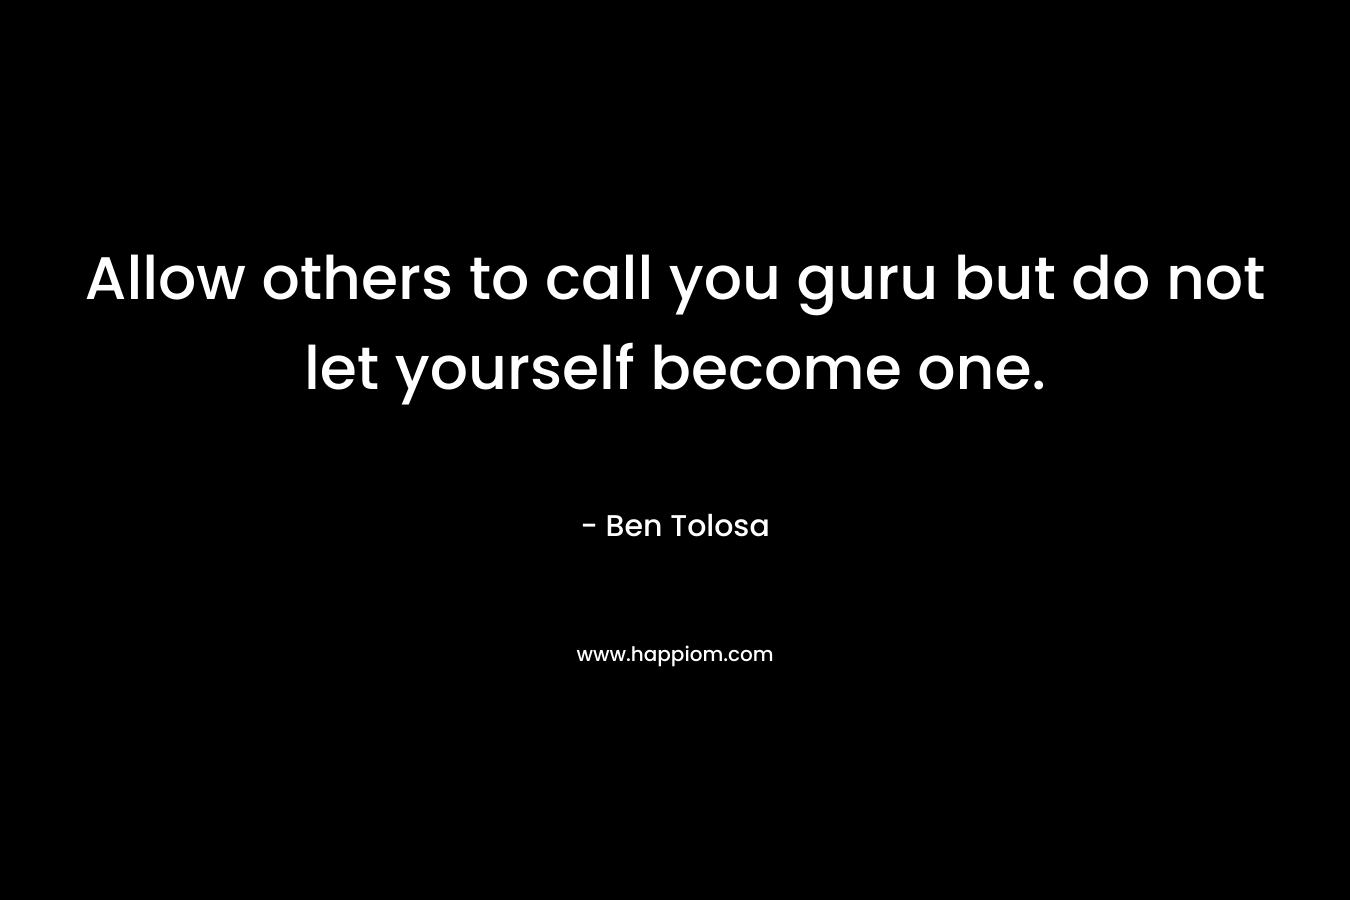 Allow others to call you guru but do not let yourself become one. – Ben Tolosa